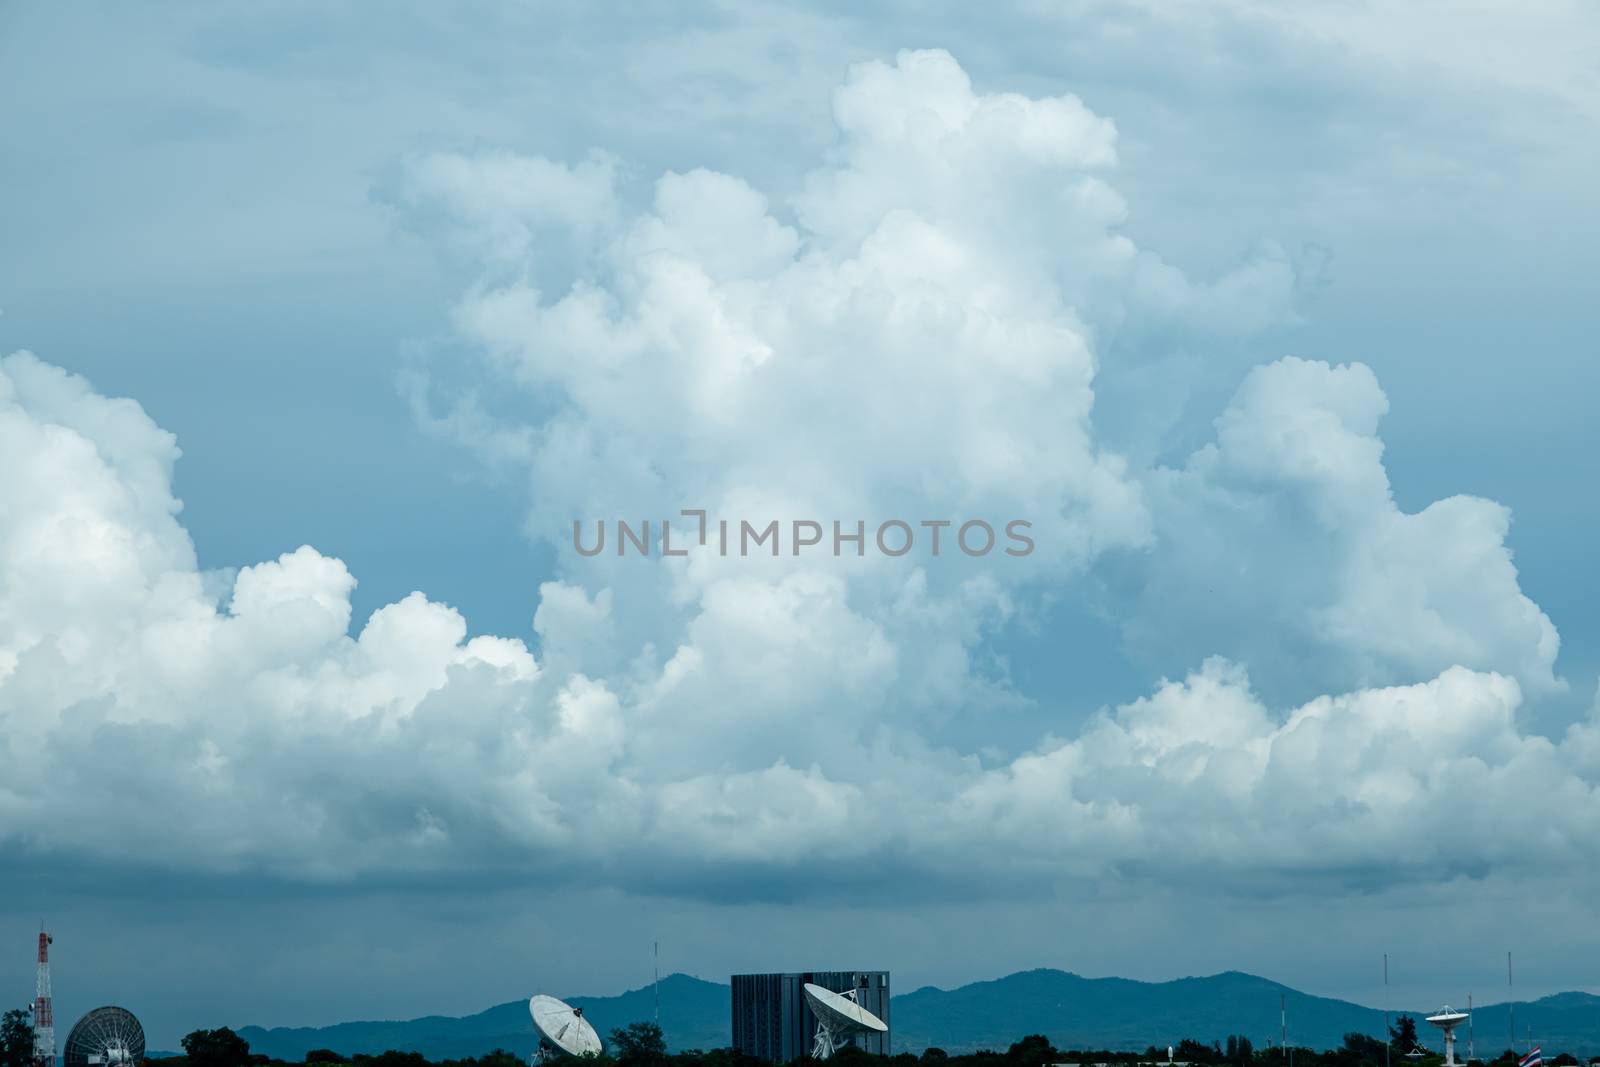 Photo of some white clouds and blue sky cloudscape for background use by peerapixs